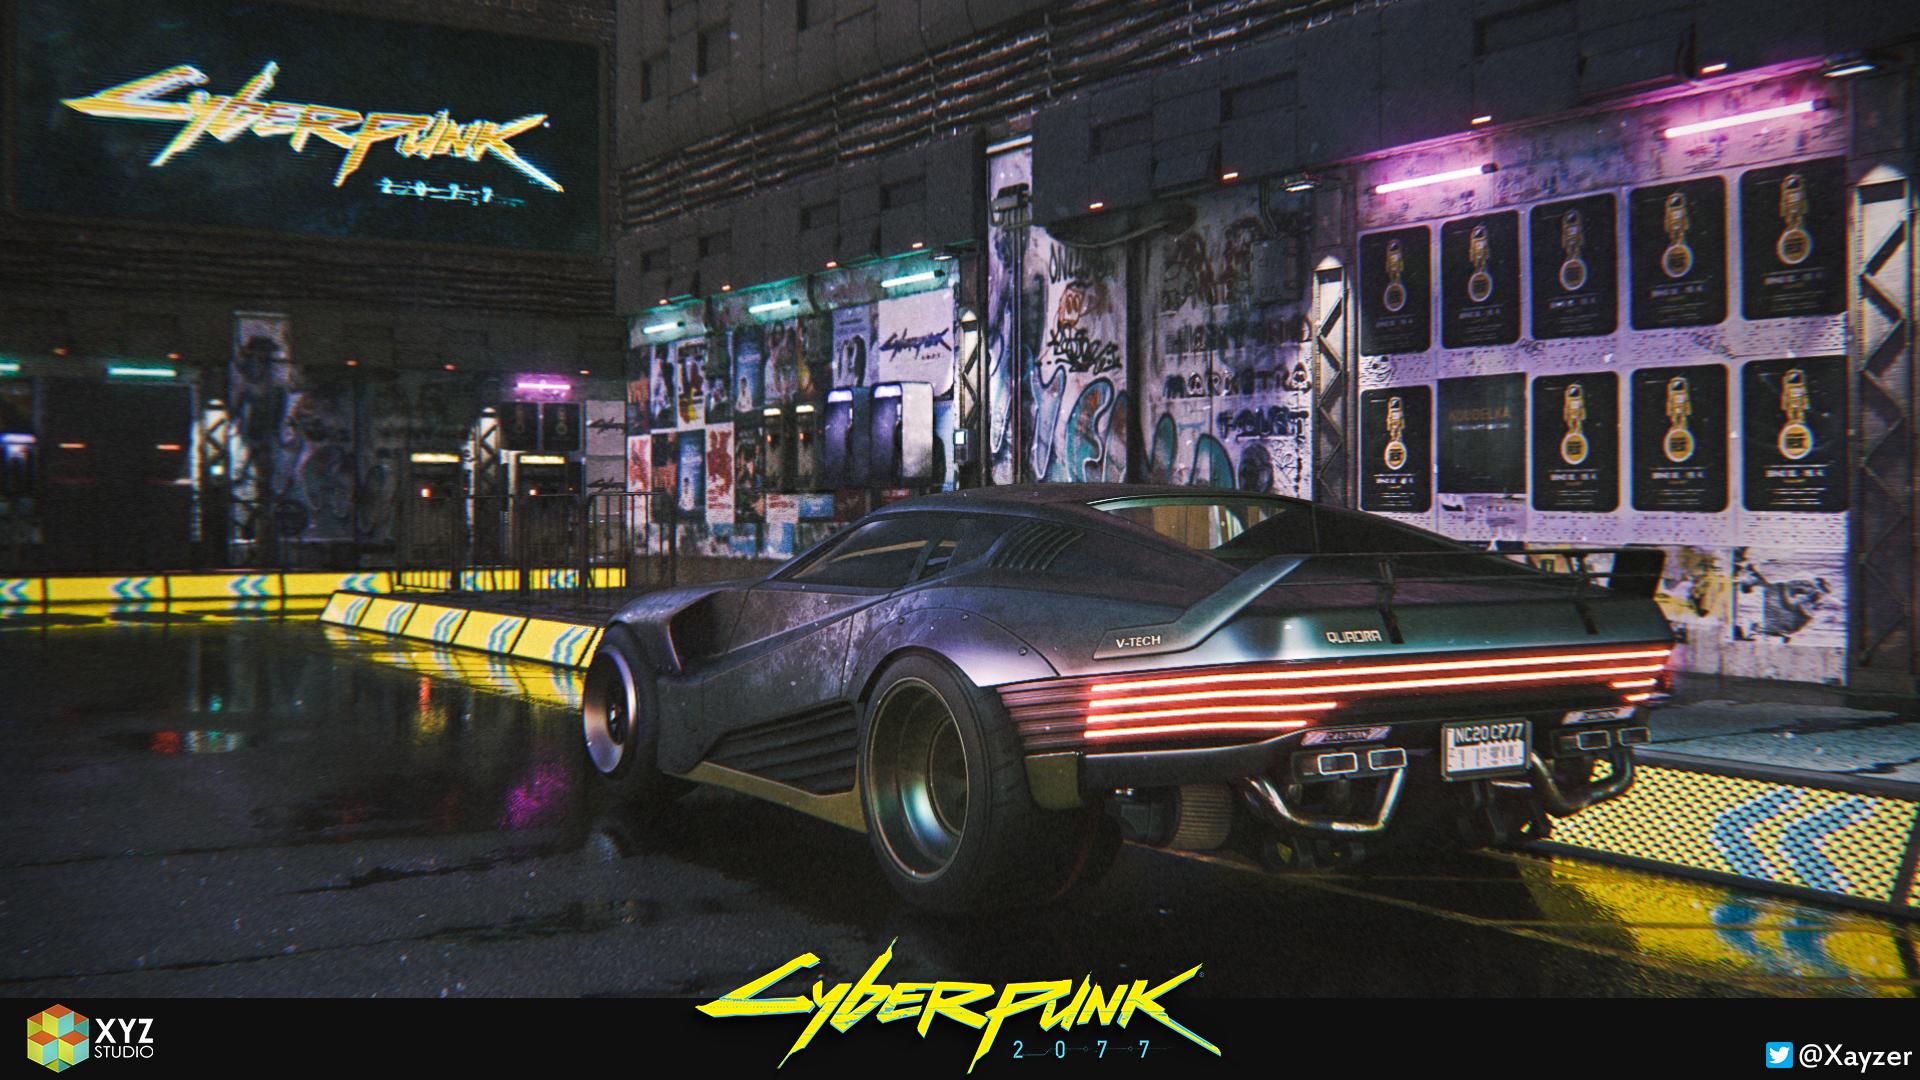 A model I made of the Cyberpunk 2077 car. I won't be able to play the game when it comes out (my computer can't even run Witcher 2), so I decided to